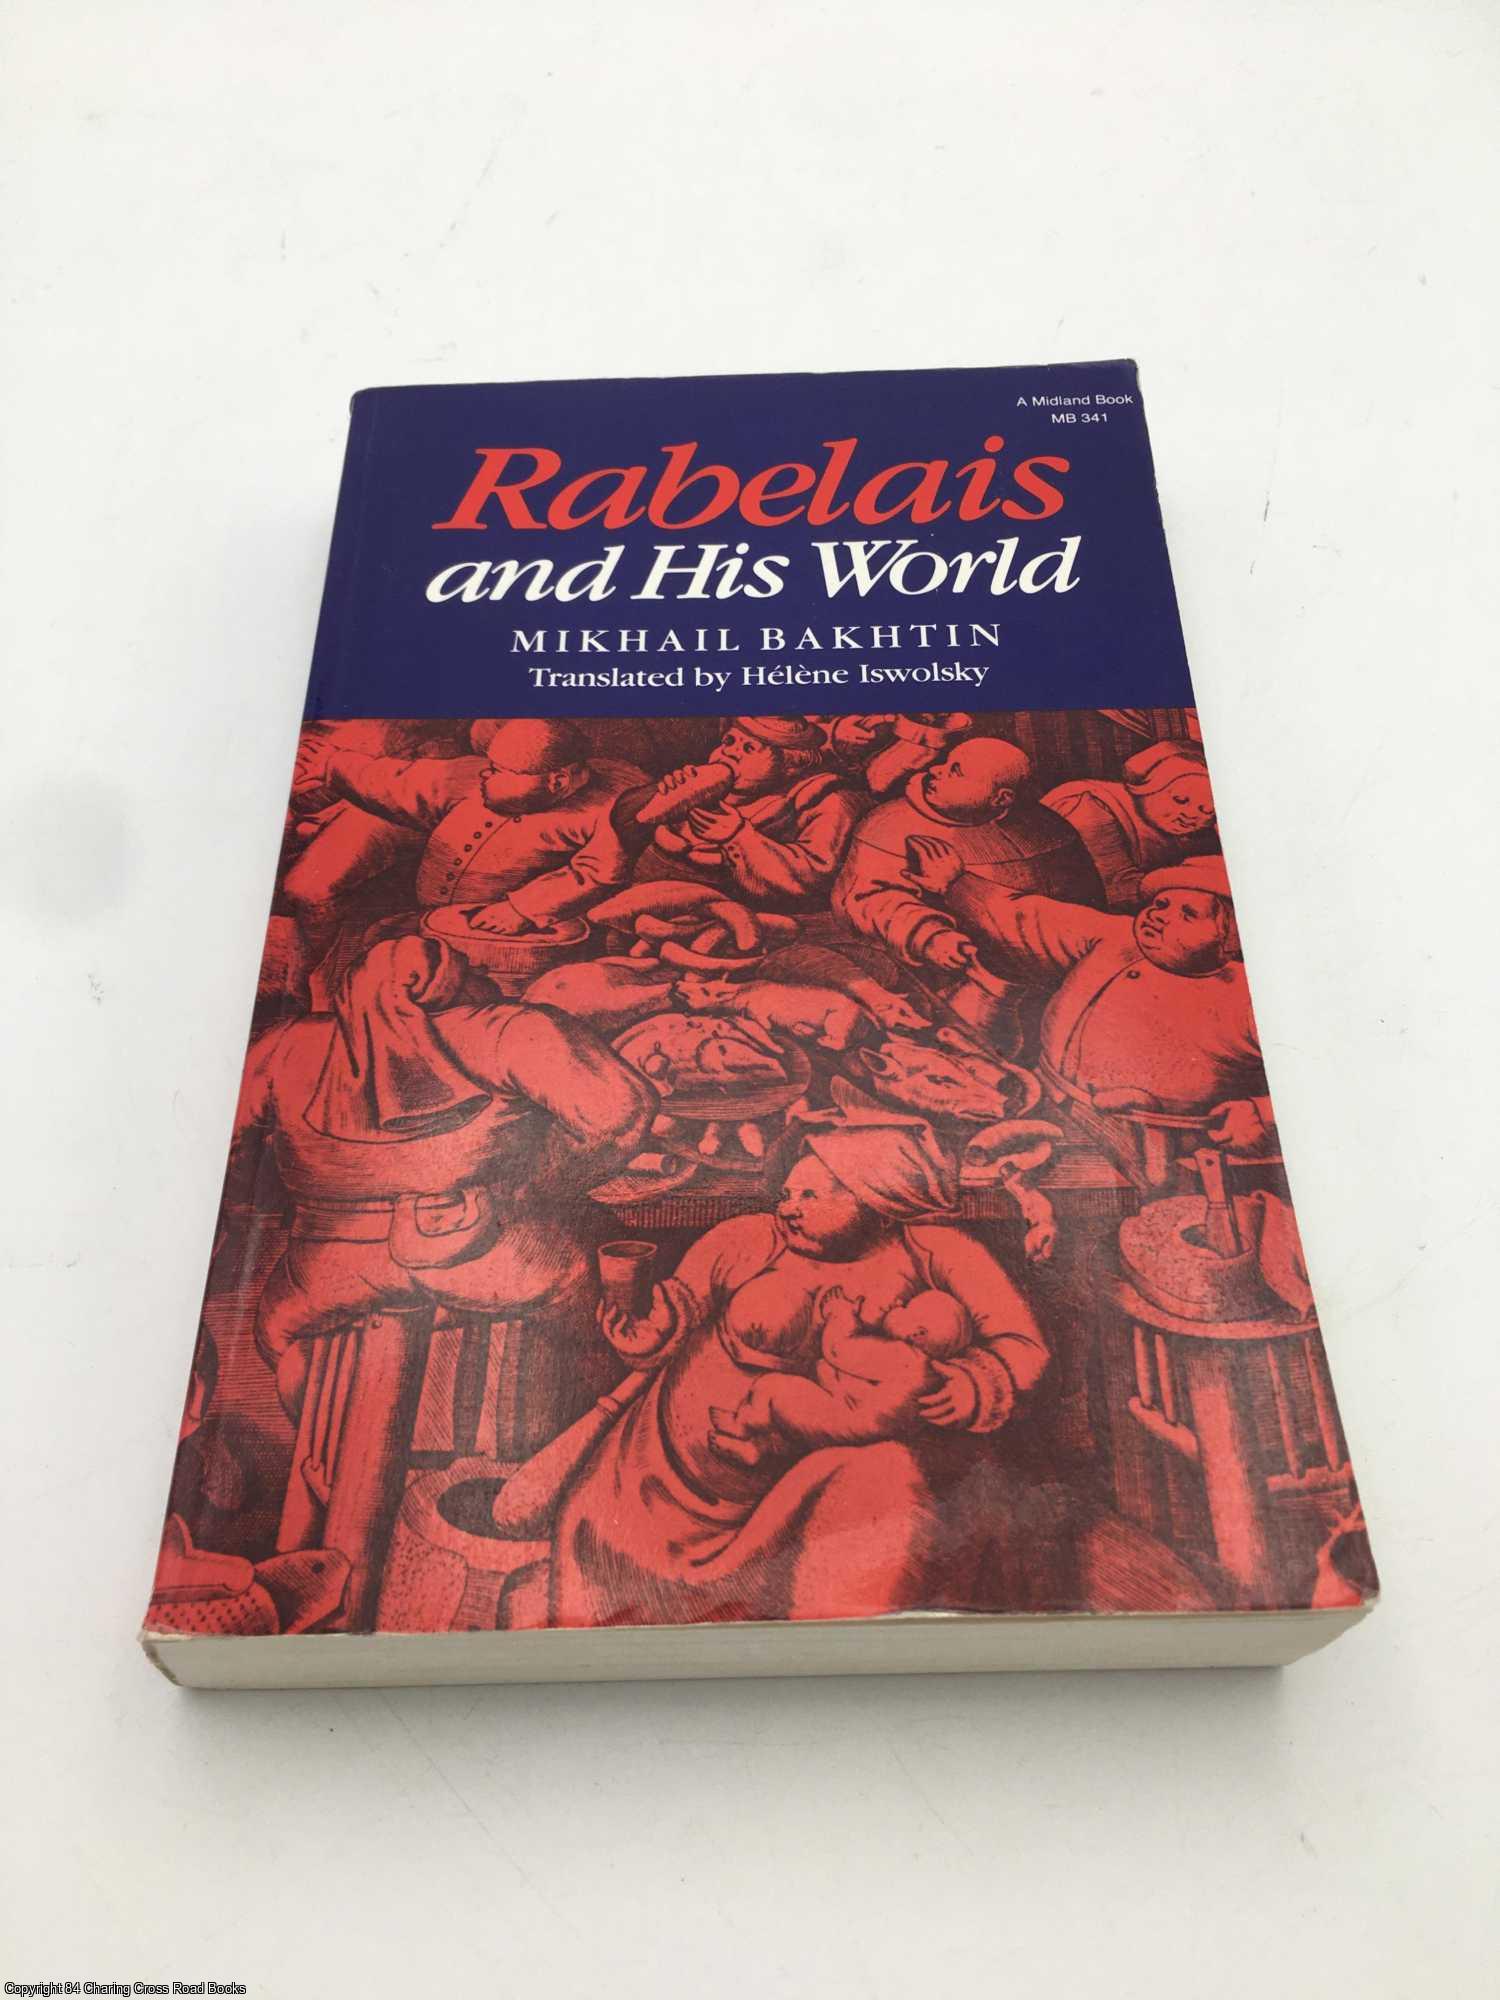 Rabelais and His World by Mikhail Bakhtin on 84 Charing Cross Rare Books